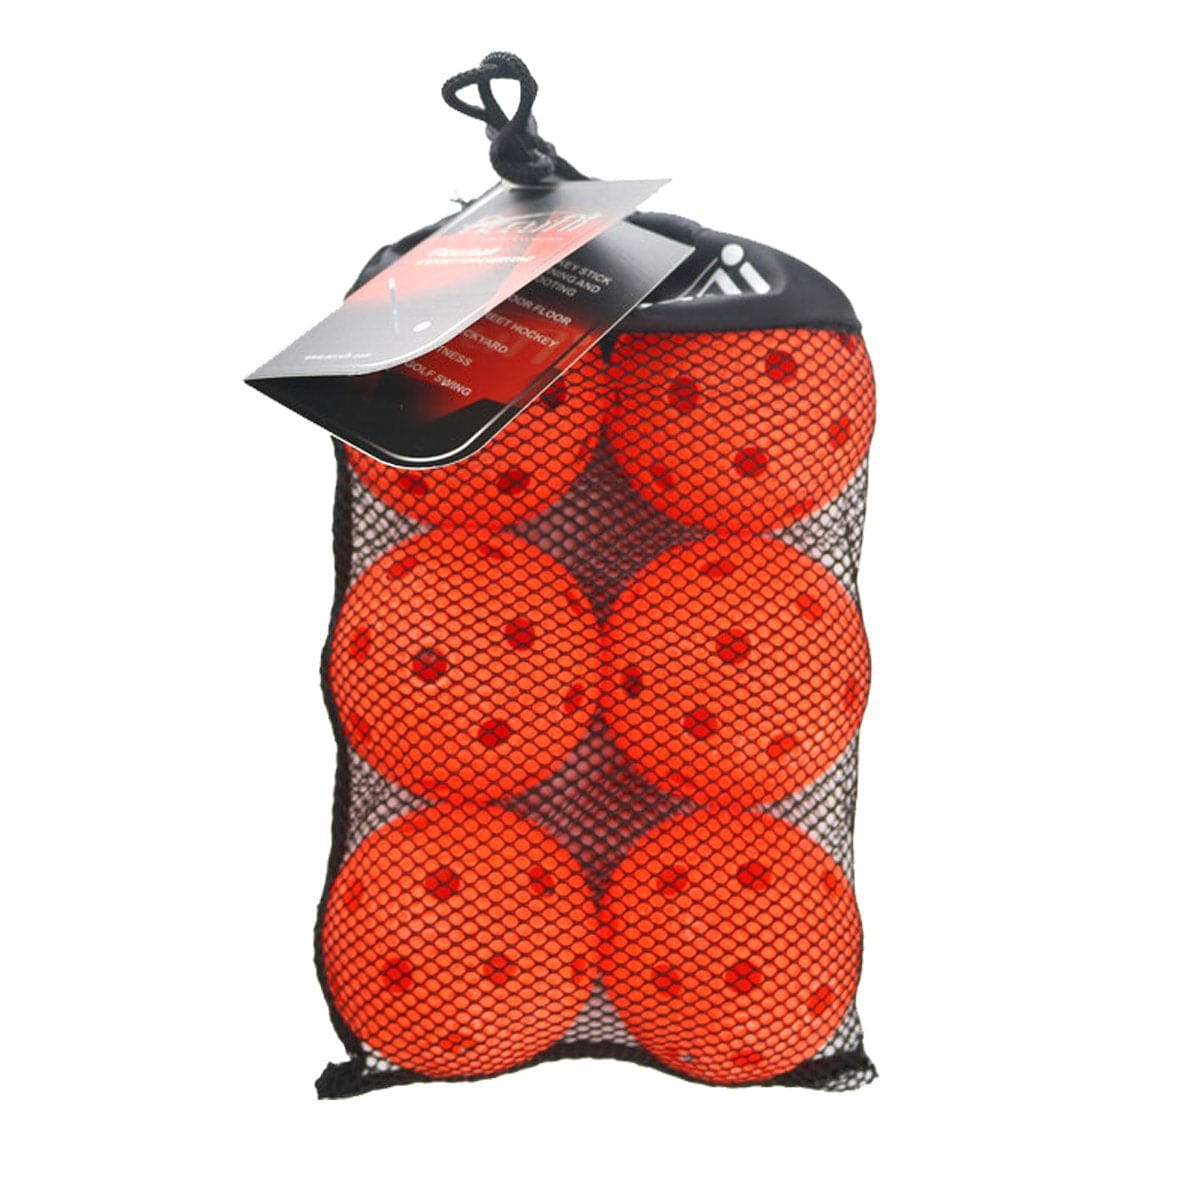 A set of small plastic balls used for Floorball. Floorball, pickleball, wiffle, wiffleball, plastic ball, ball with holes, ball with pock marks.